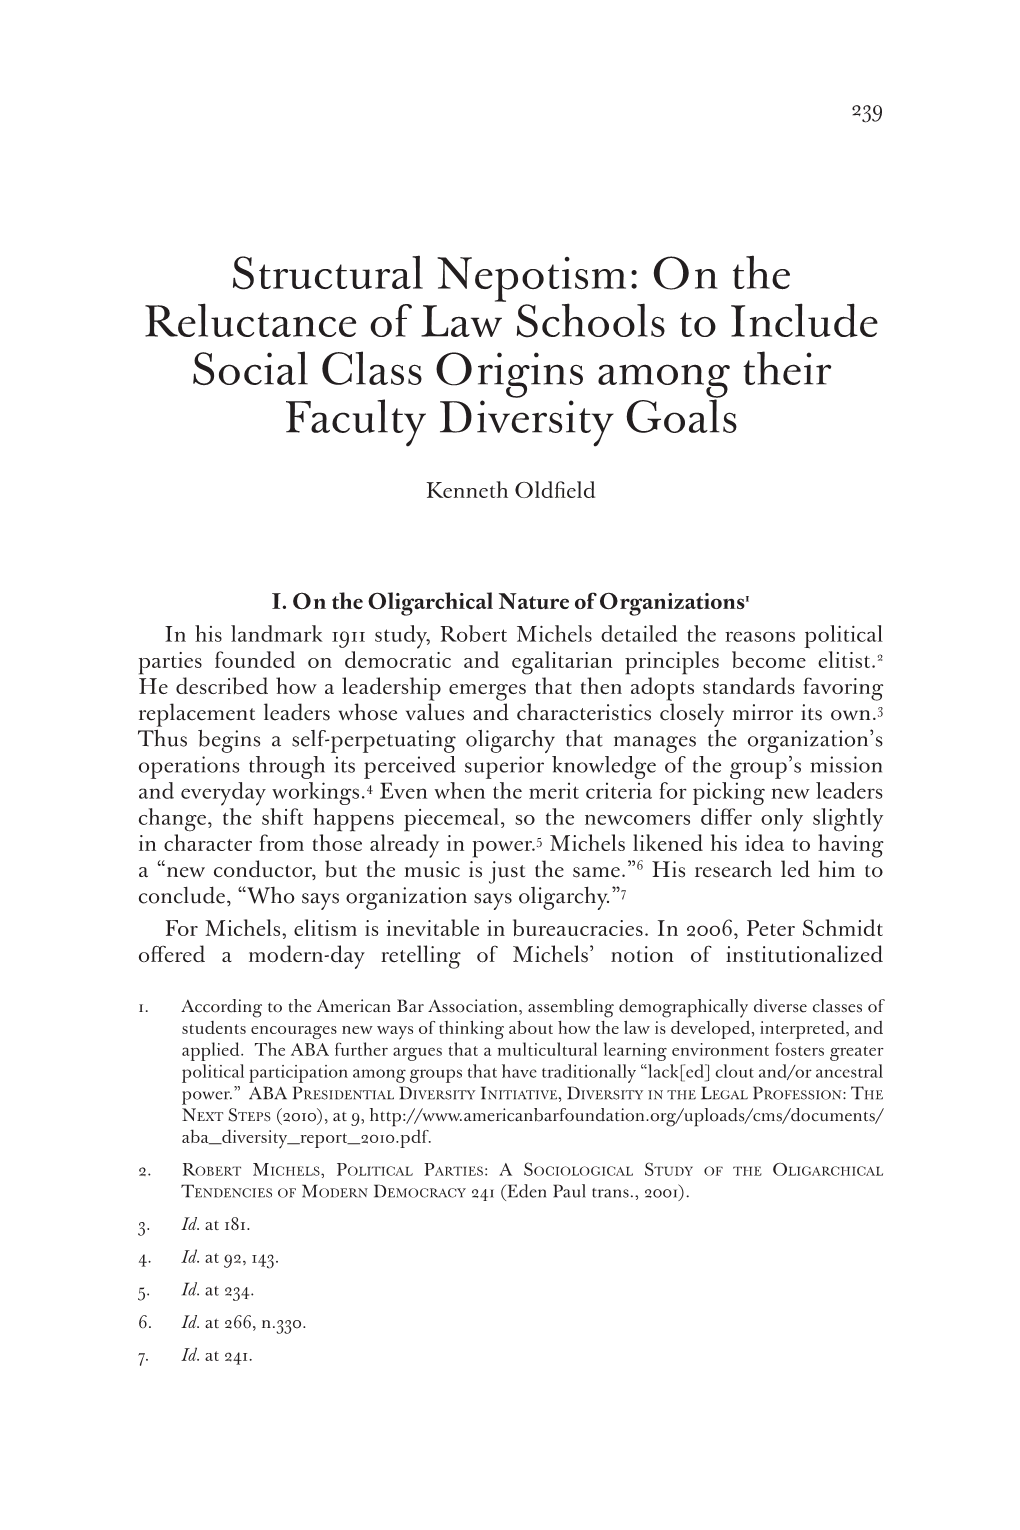 Structural Nepotism: on the Reluctance of Law Schools to Include Social Class Origins Among Their Faculty Diversity Goals